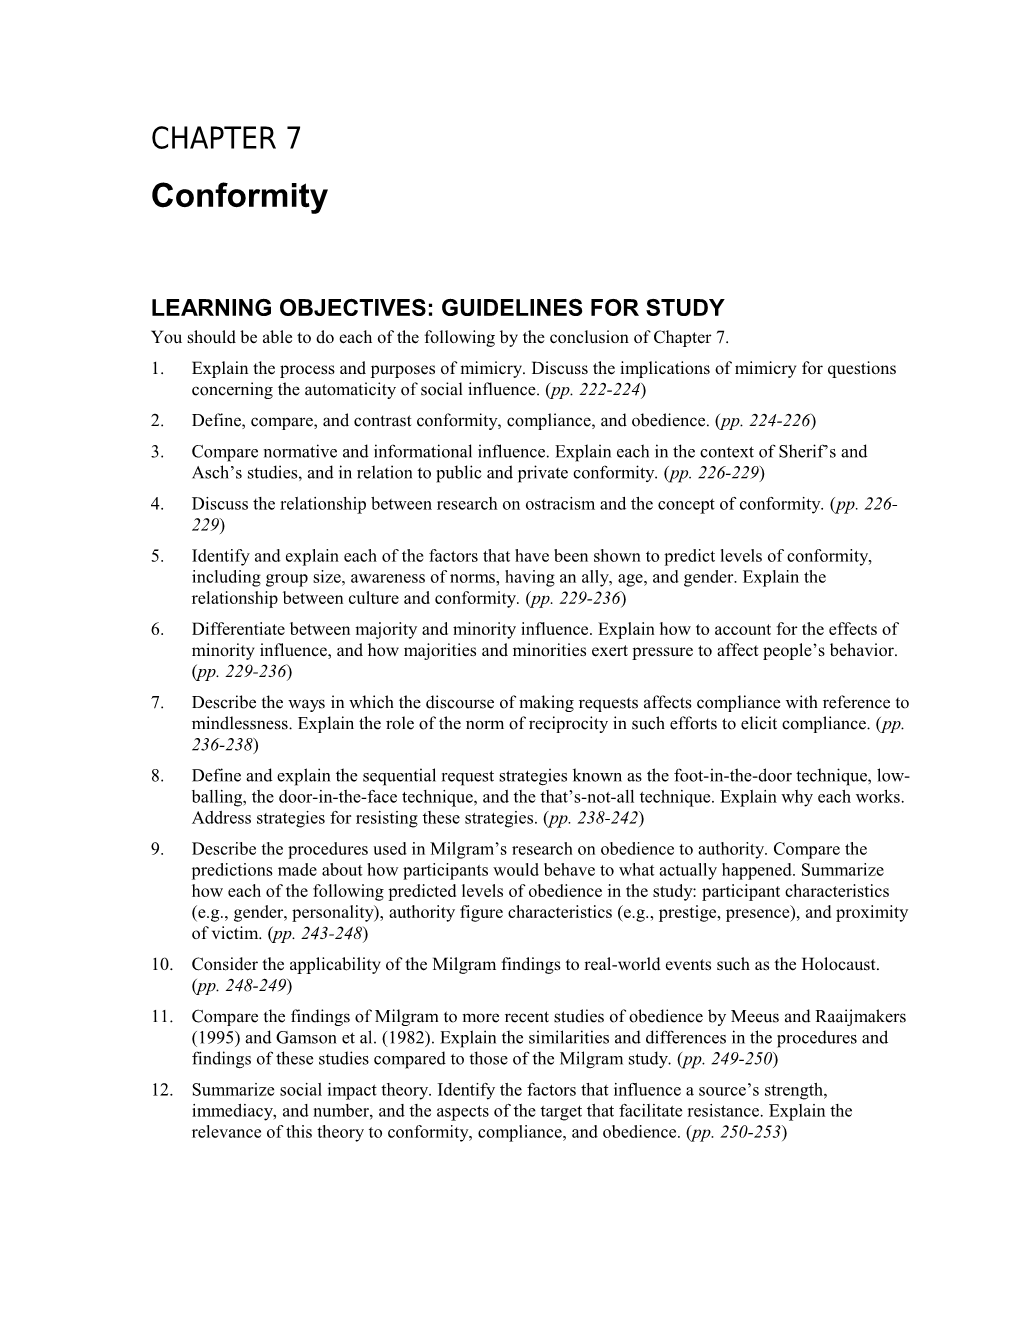 Learning Objectives: Guidelines for Study